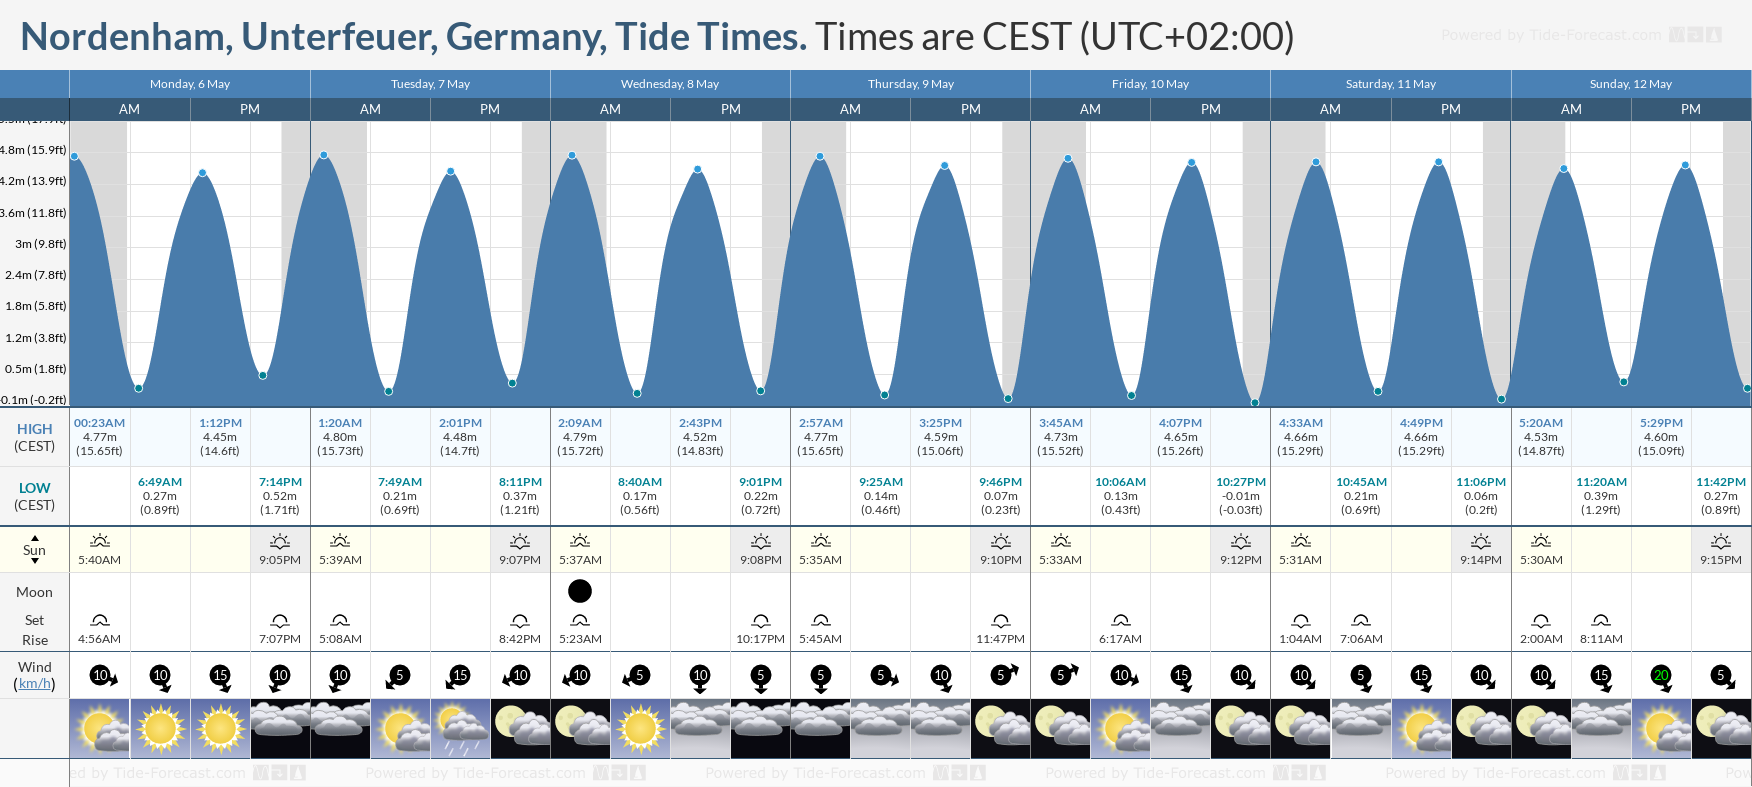 Nordenham, Unterfeuer, Germany Tide Chart including high and low tide tide times for the next 7 days